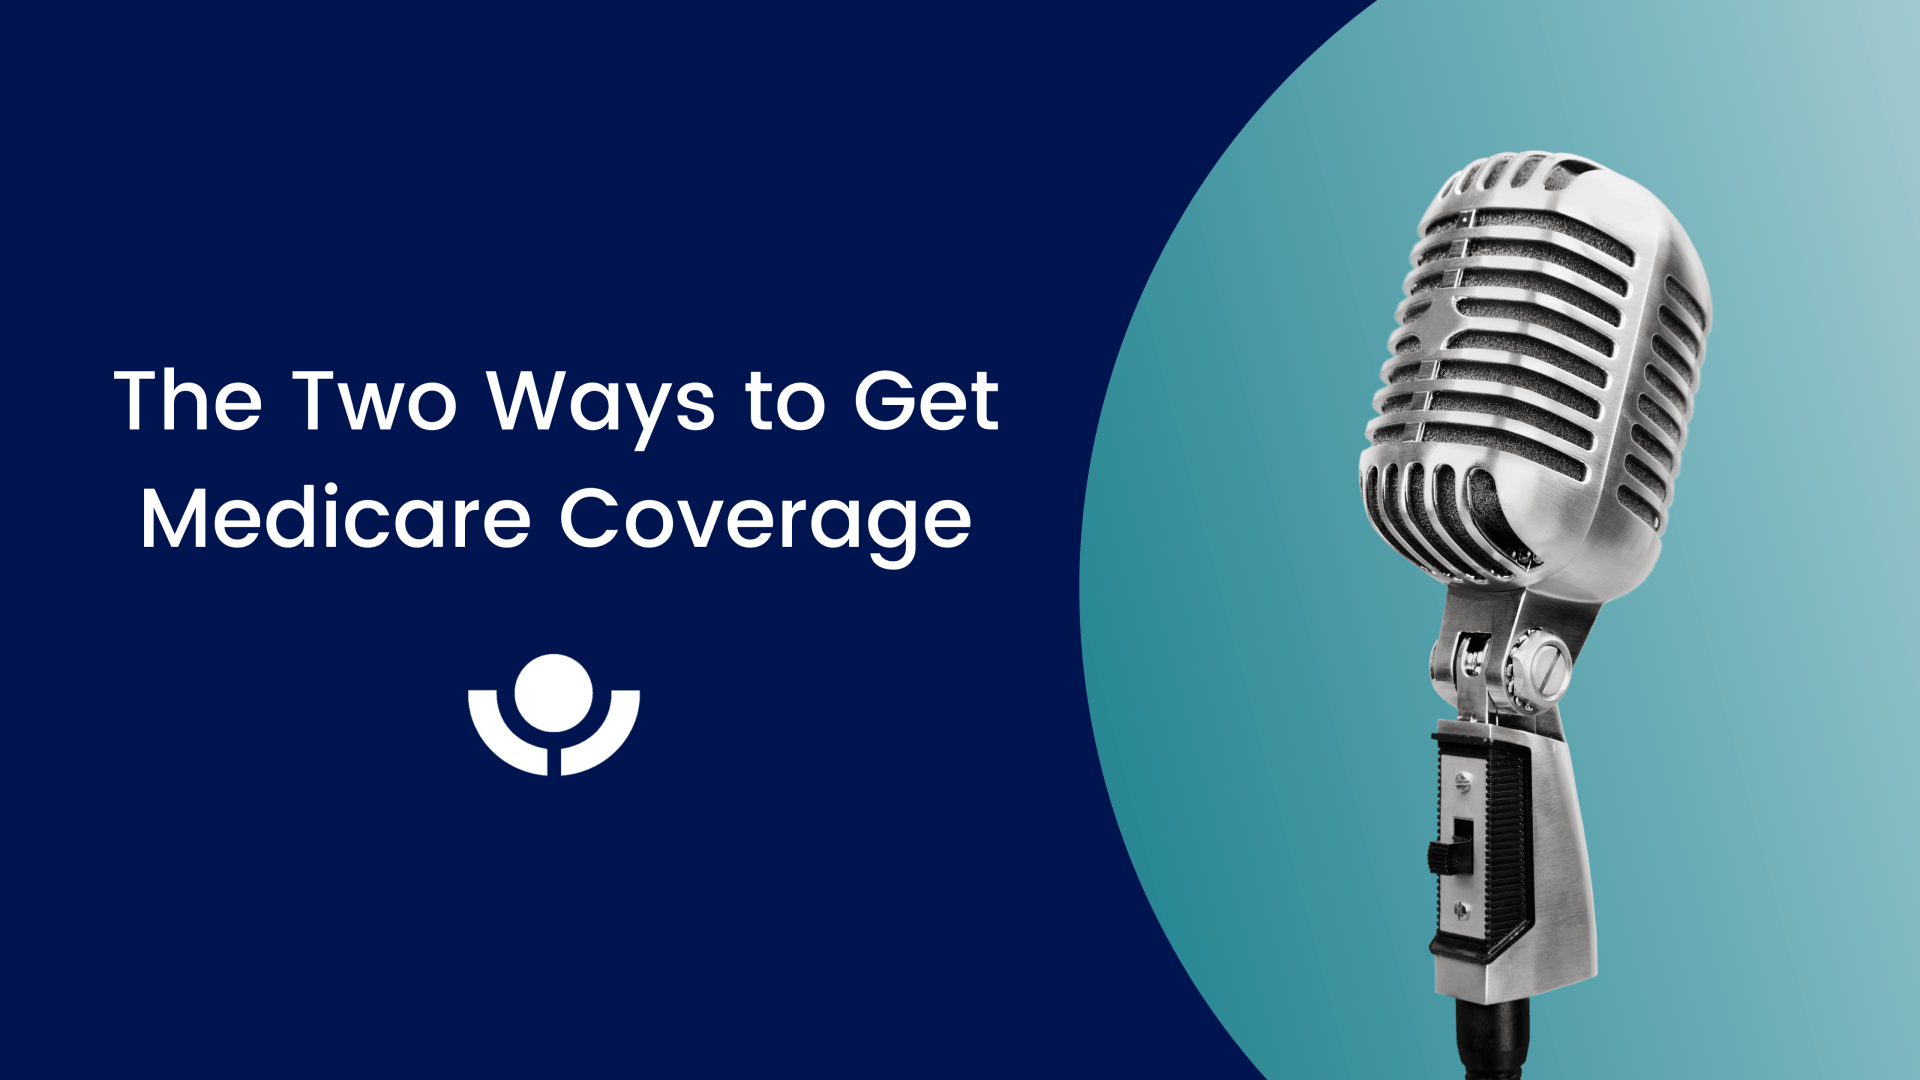 The Two Ways to Get Medicare Coverage